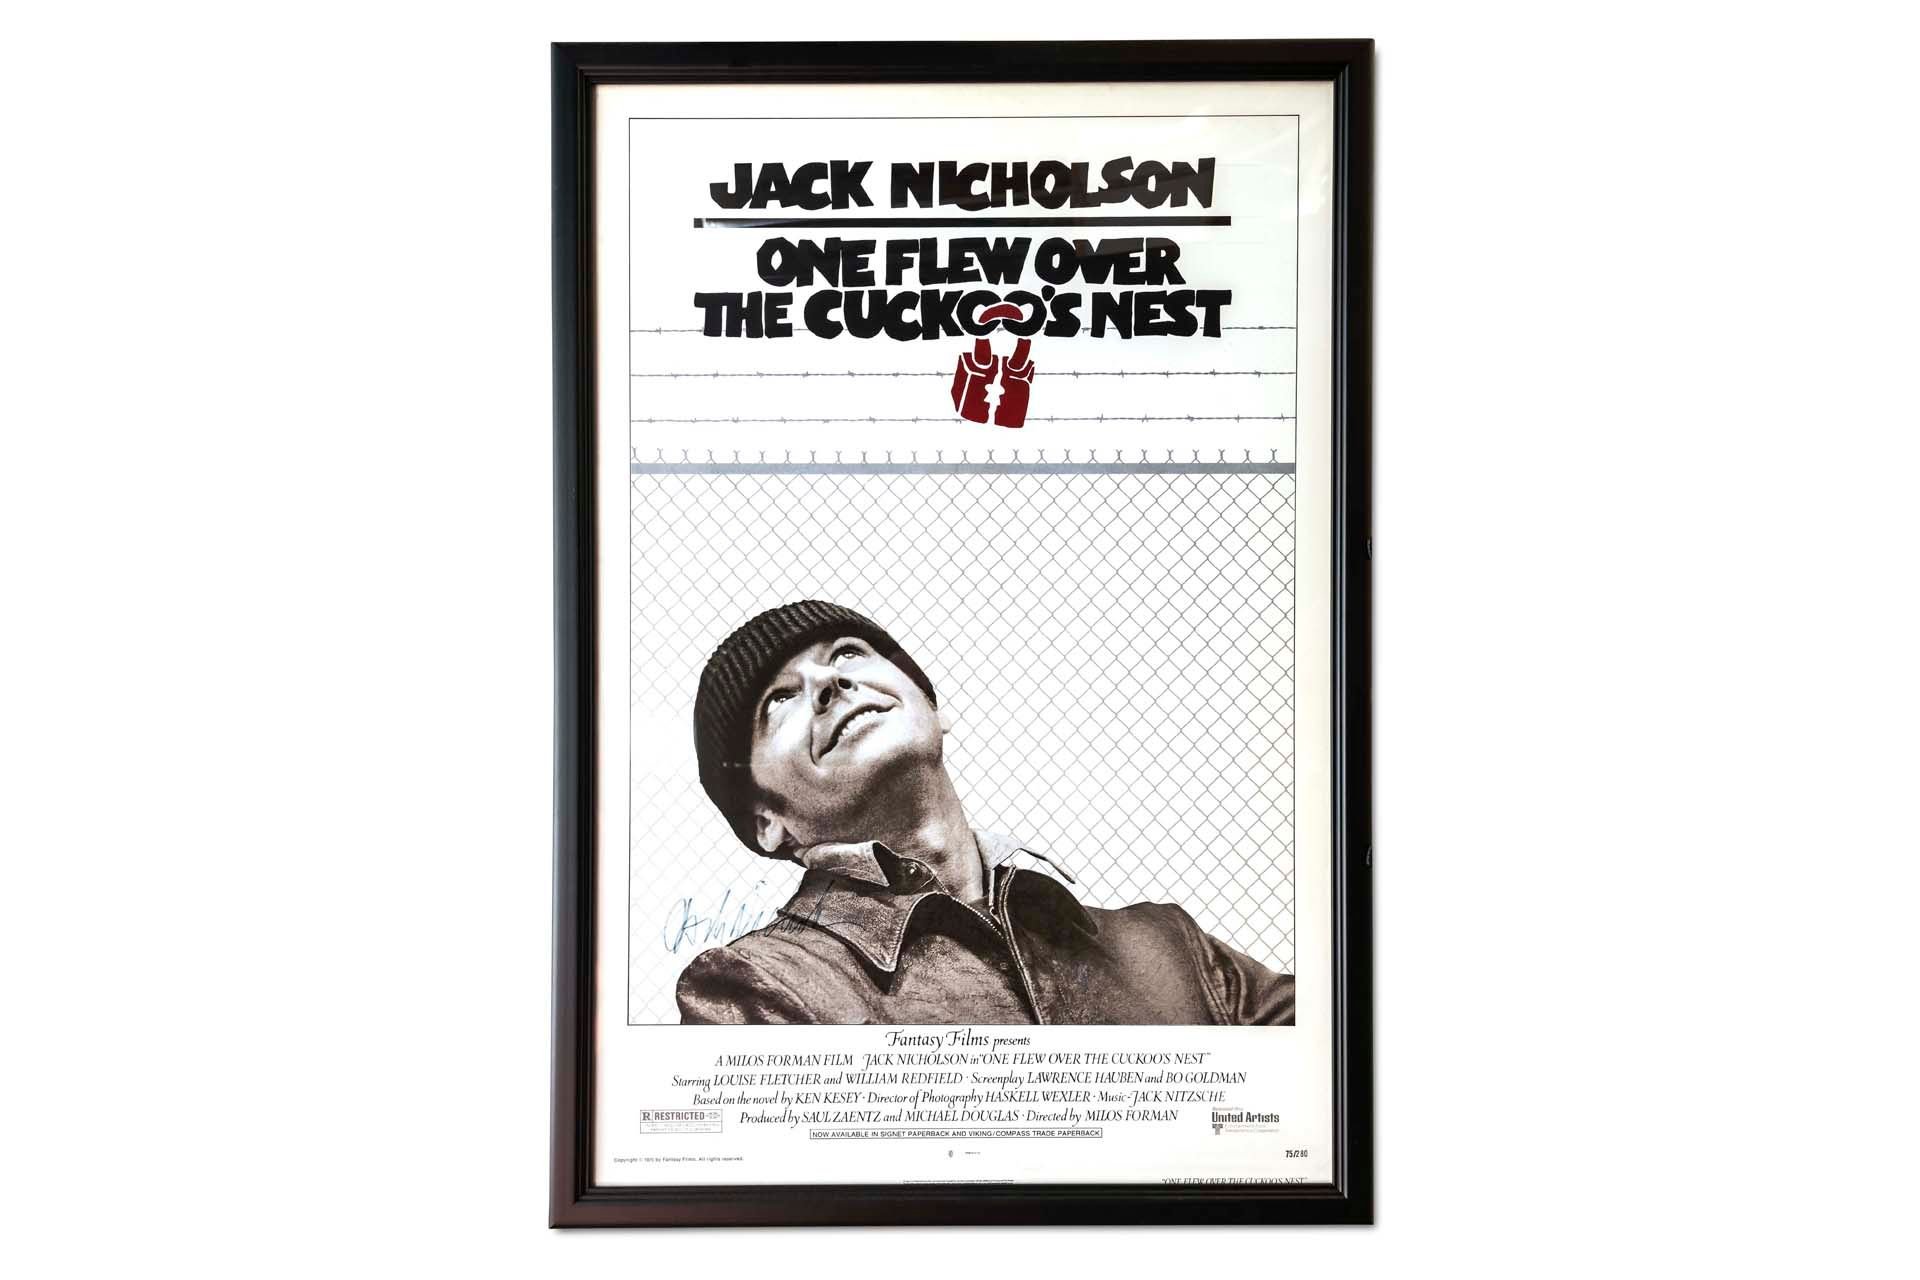 For Sale Framed 'One Flew Over the Cuckoo's Nest' Poster 75/280 Signed by Jack Nicholson